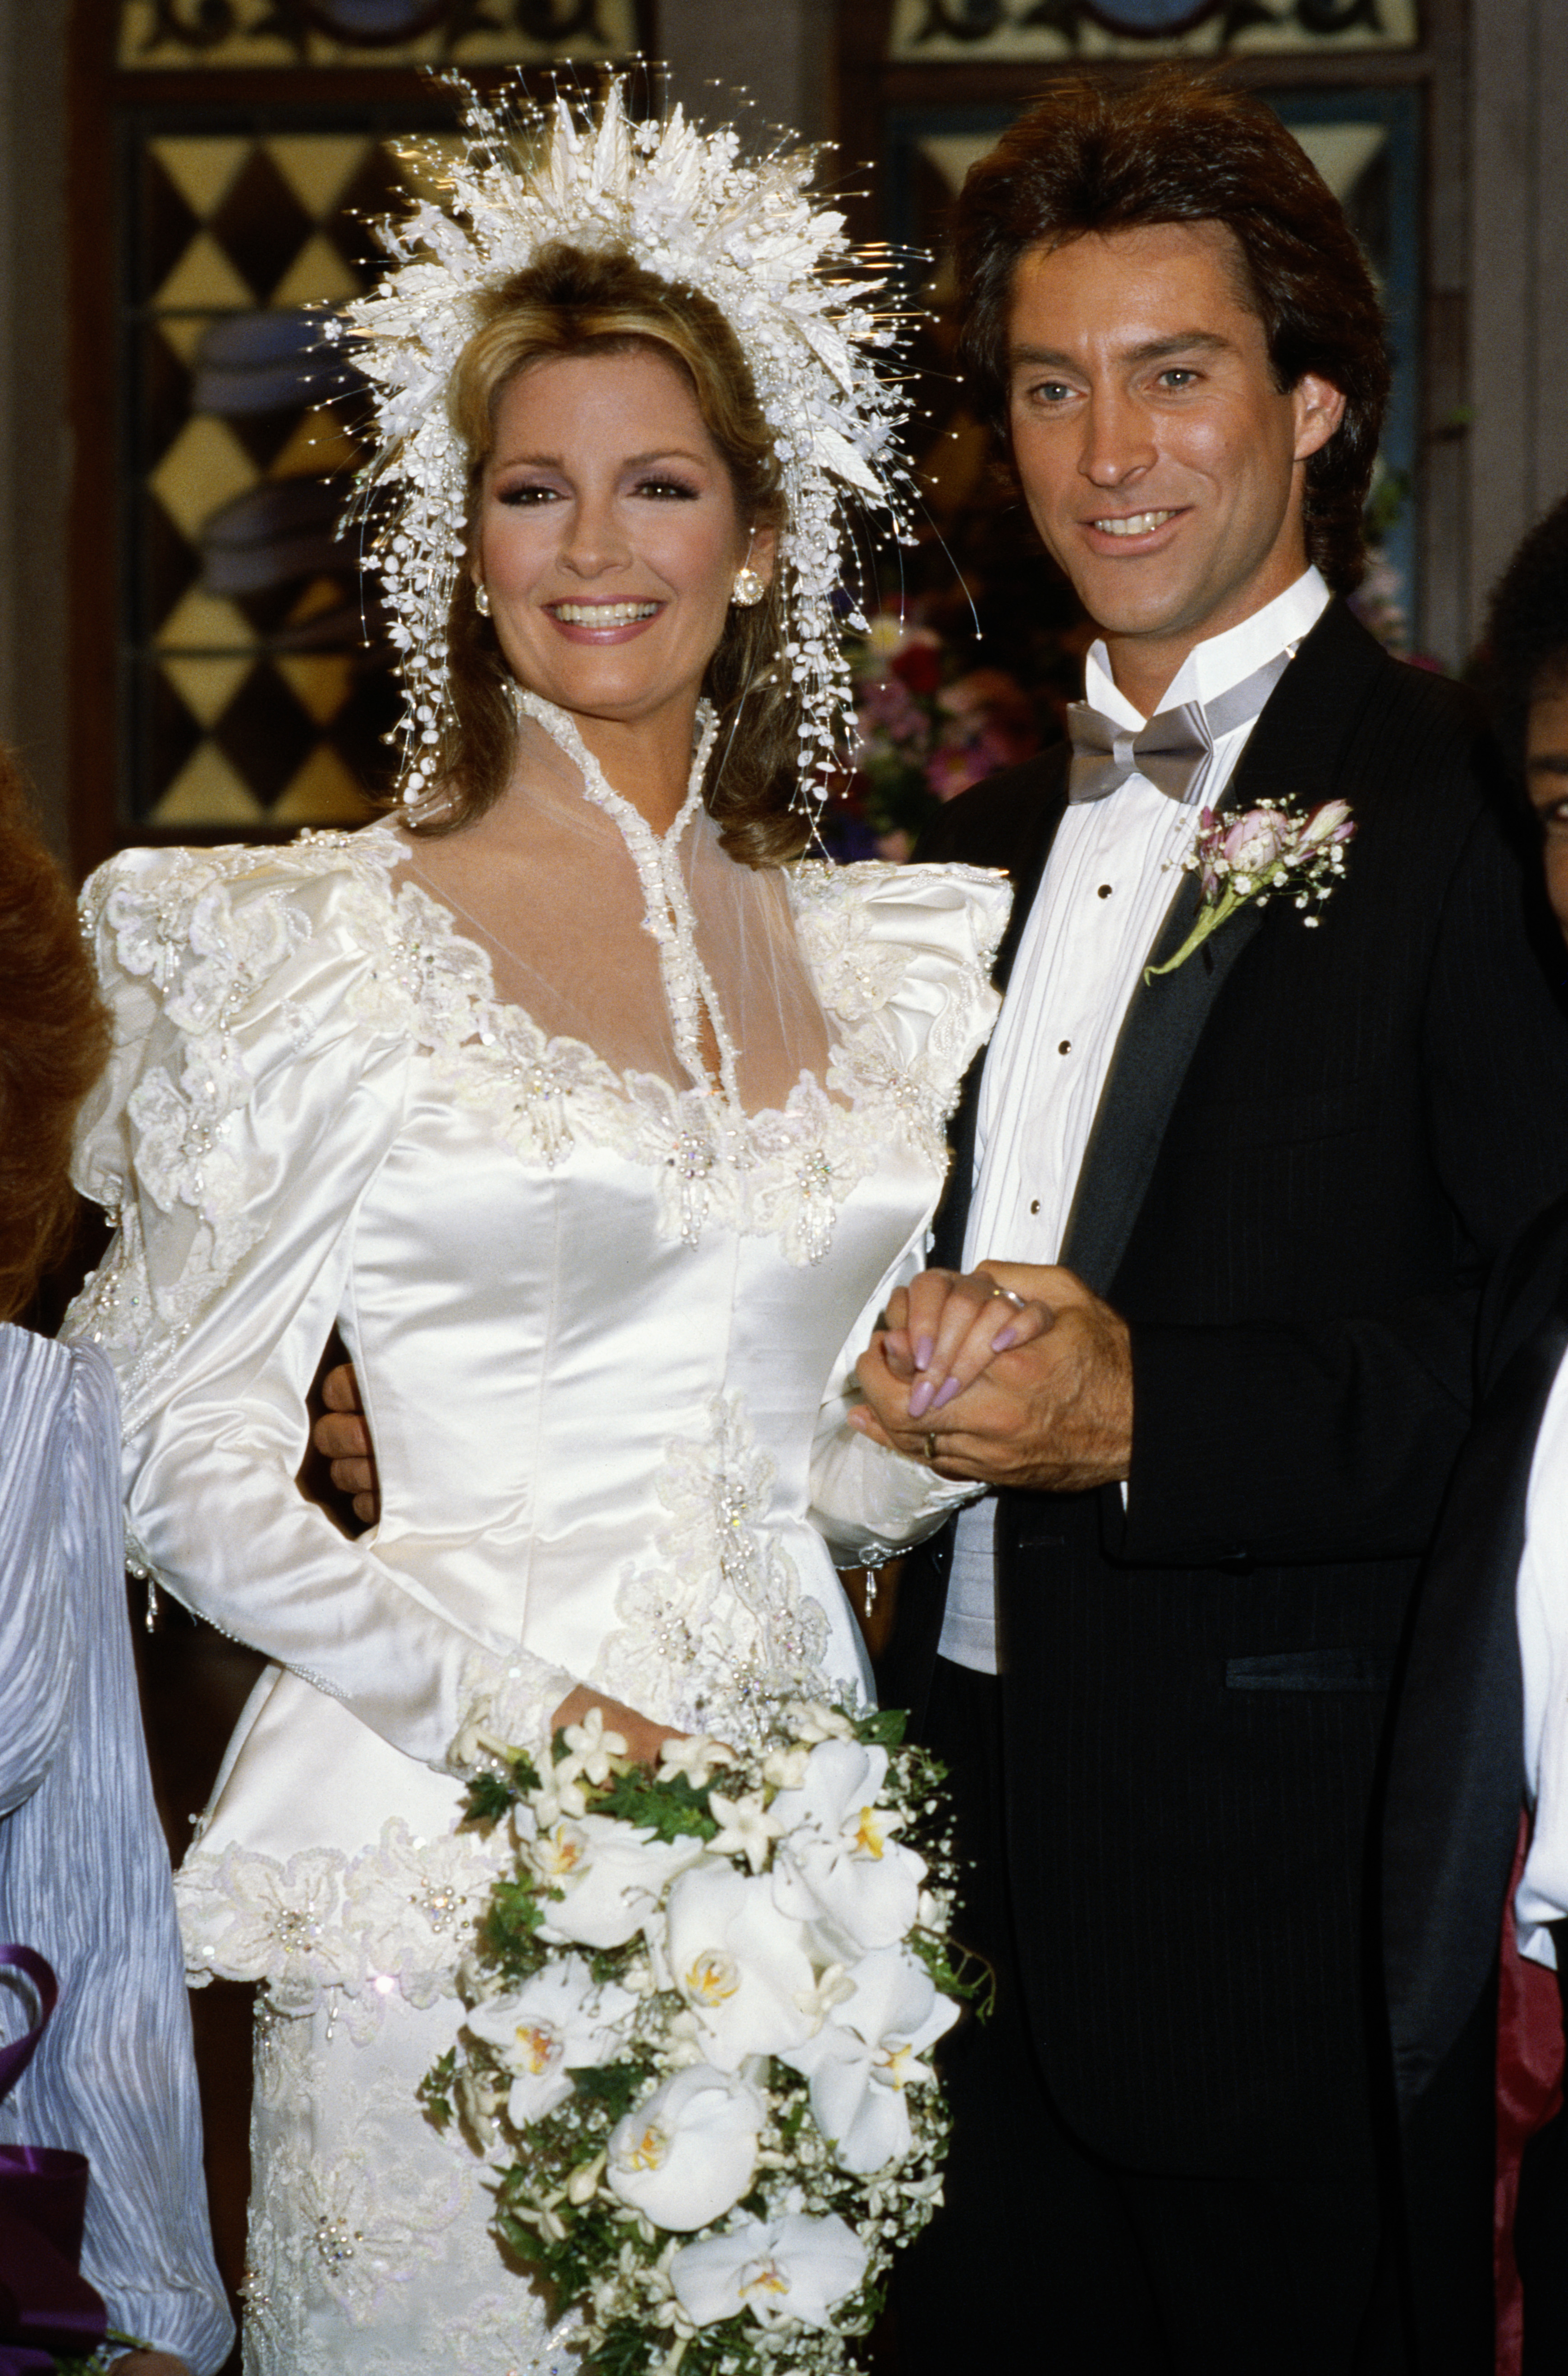 American actress Deidre Hall stars with Drake Hogestyn in a wedding scene from "Days of Our Lives," circa 2005. | Source: Getty Images